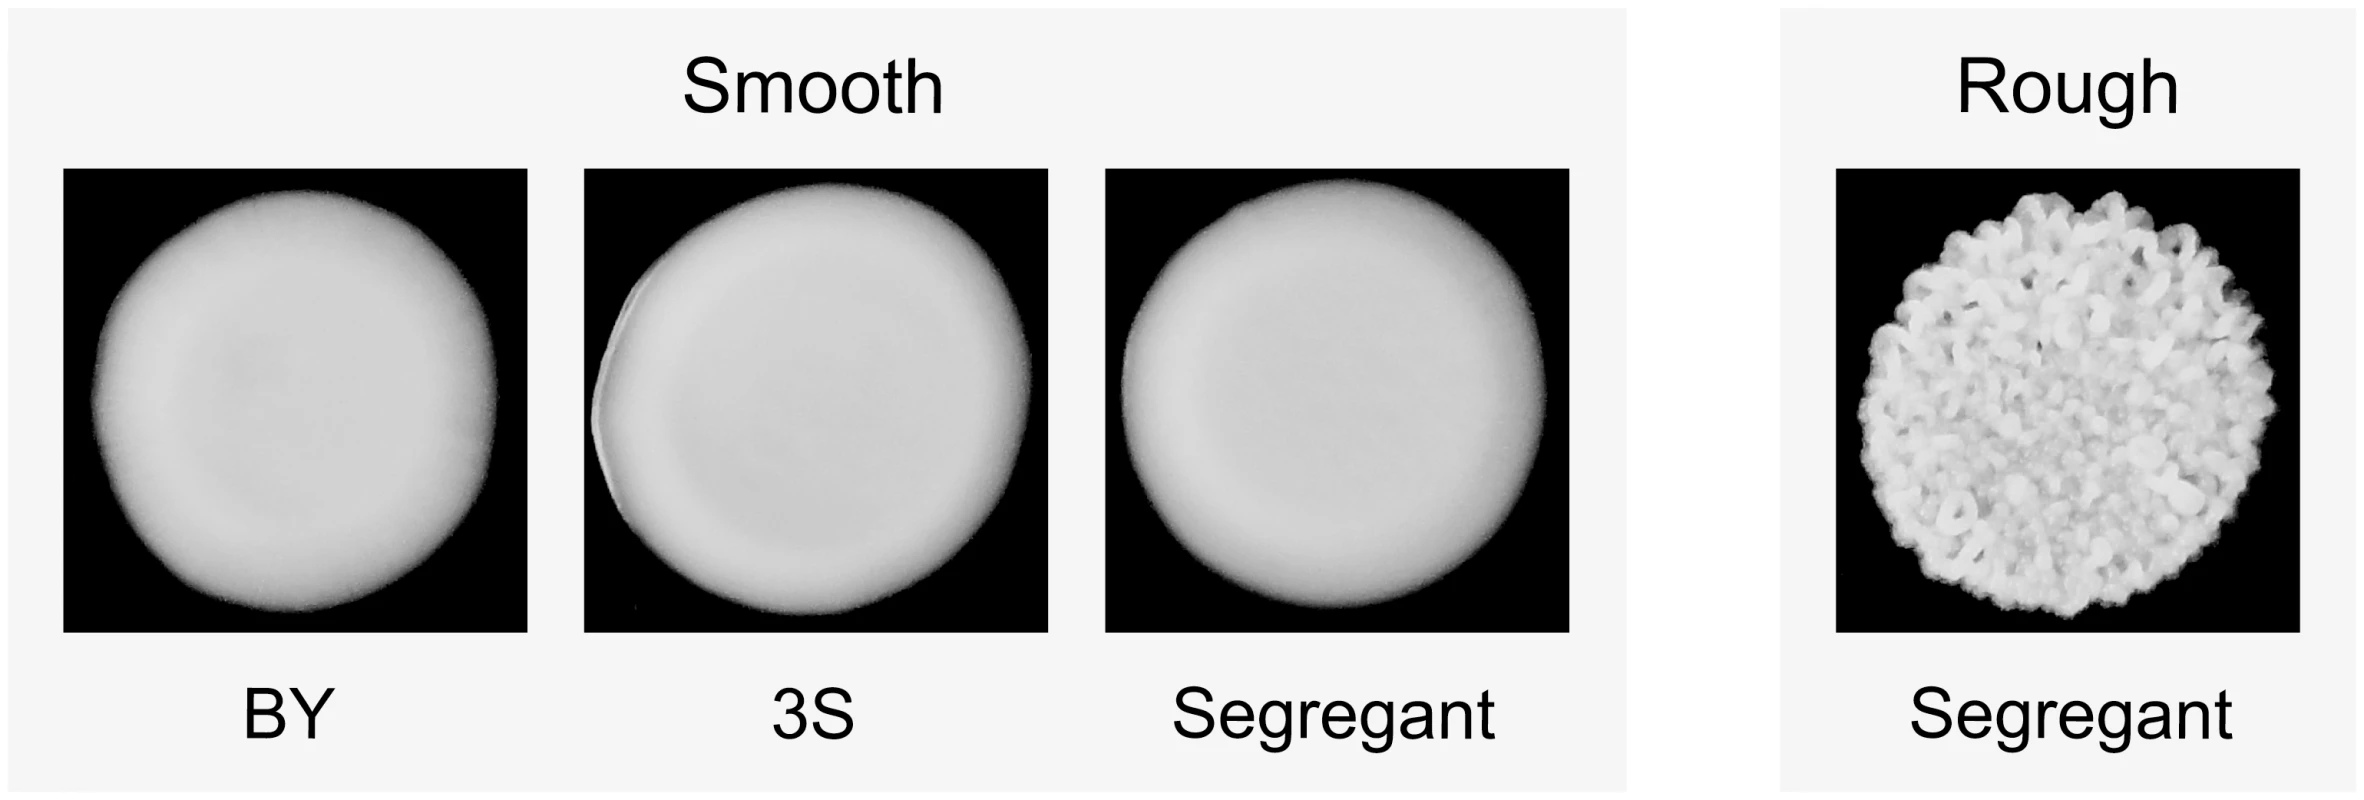 Colony morphology phenotypes that occur in the BYx3S cross in the presence of <i>ira2Δ</i>2933.